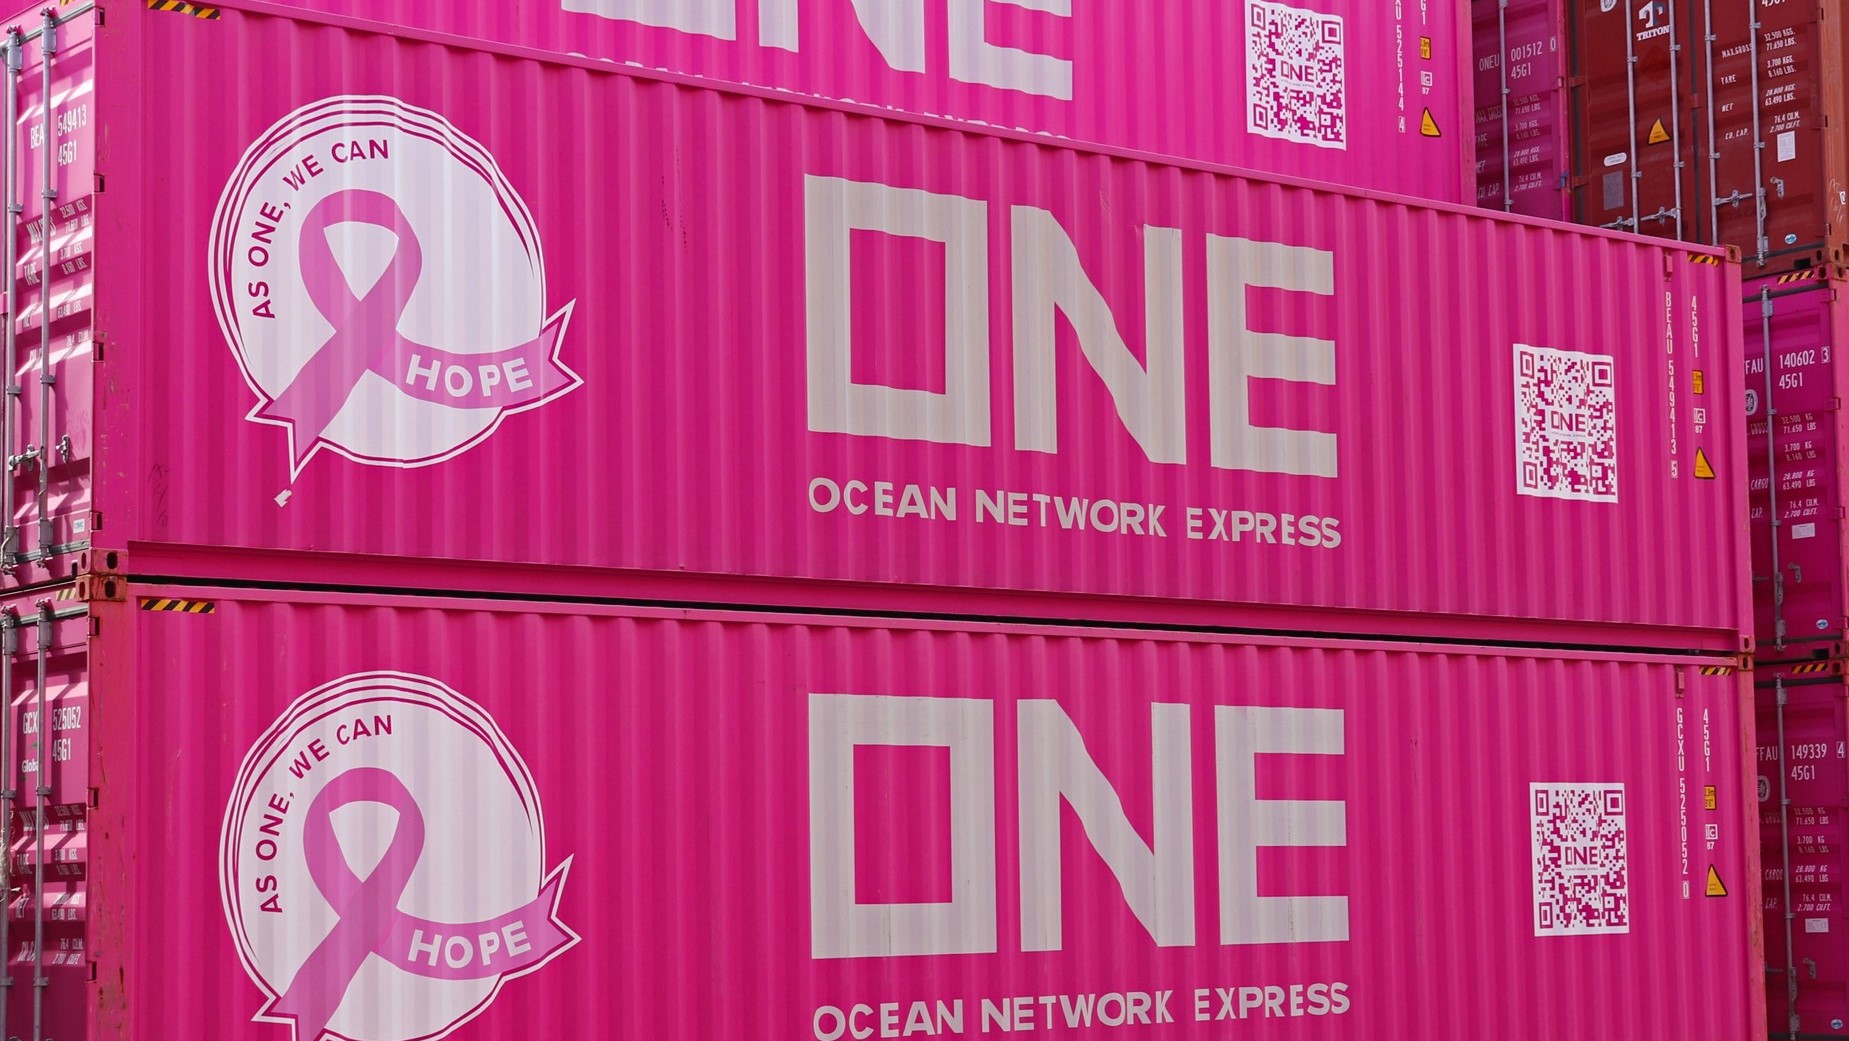 The Pink #Consequences Shipping Container